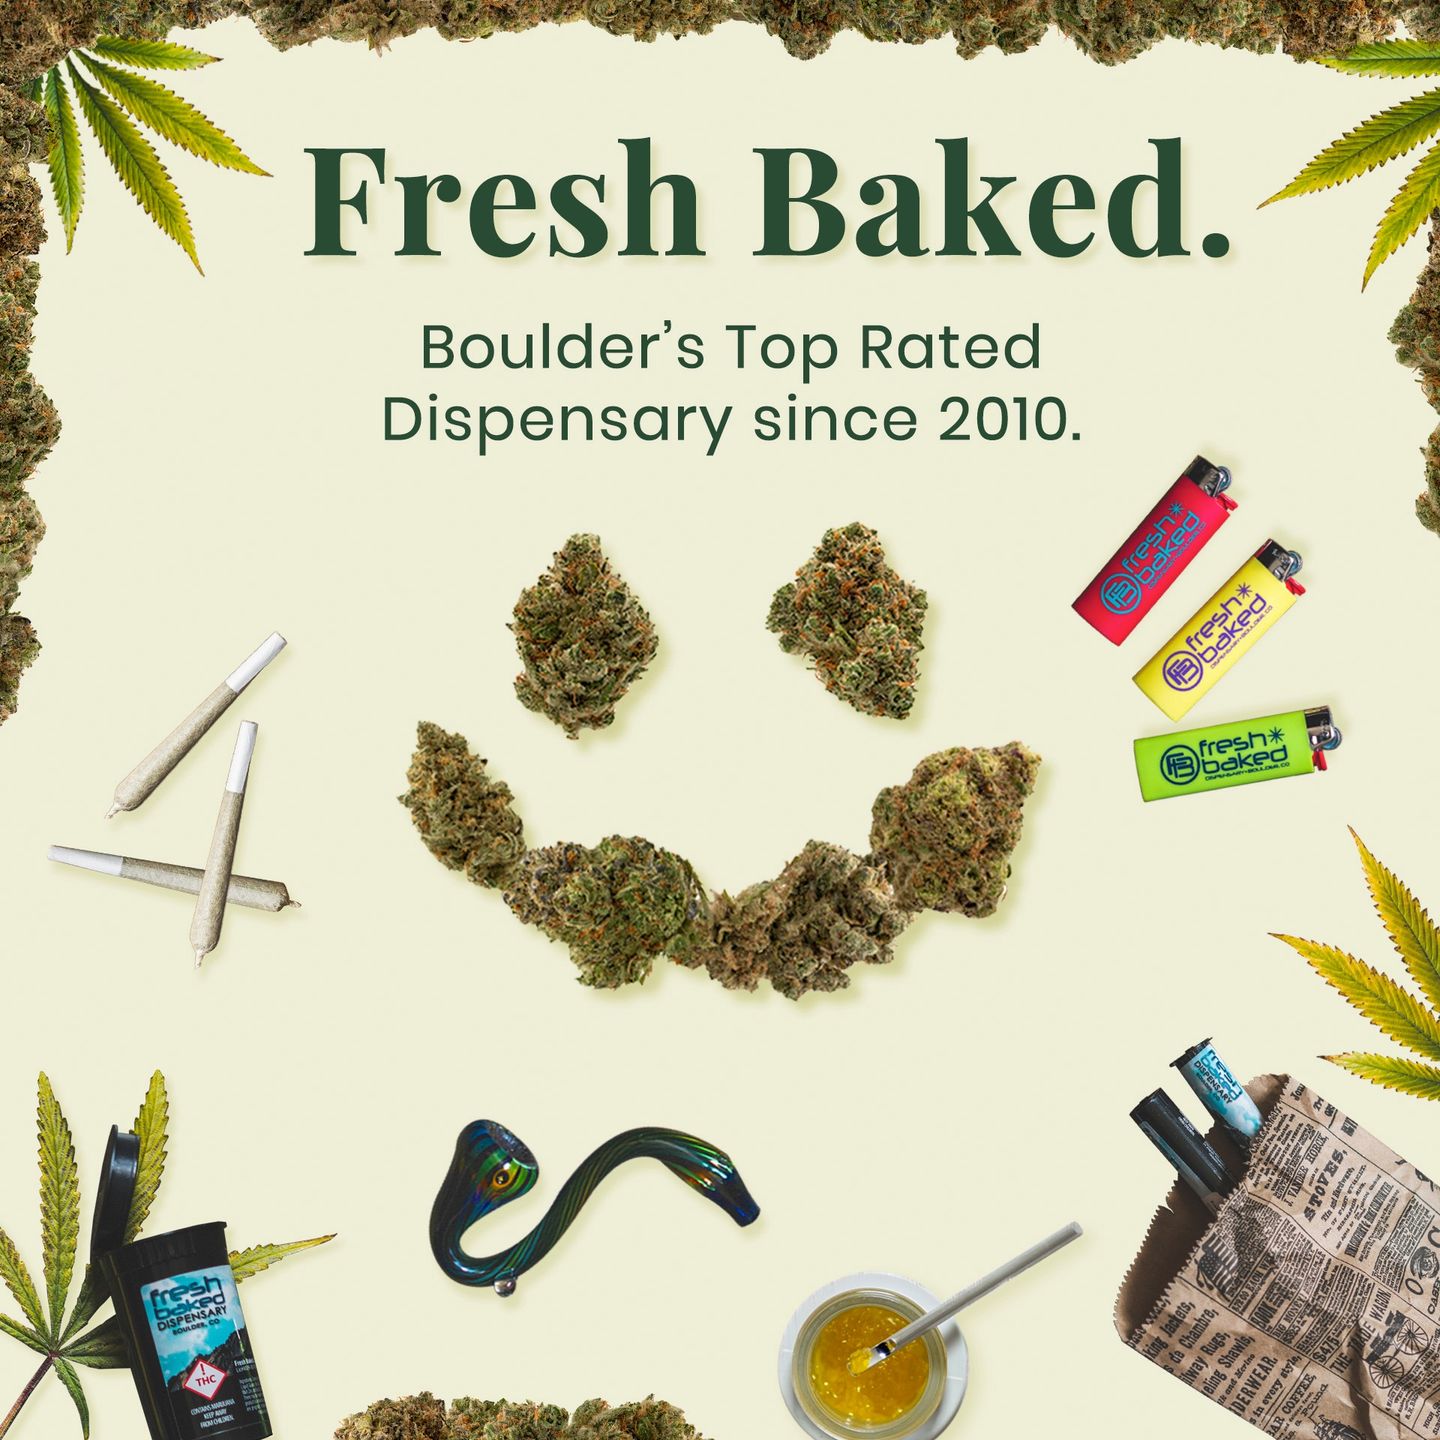 image feature Fresh Baked Dispensary